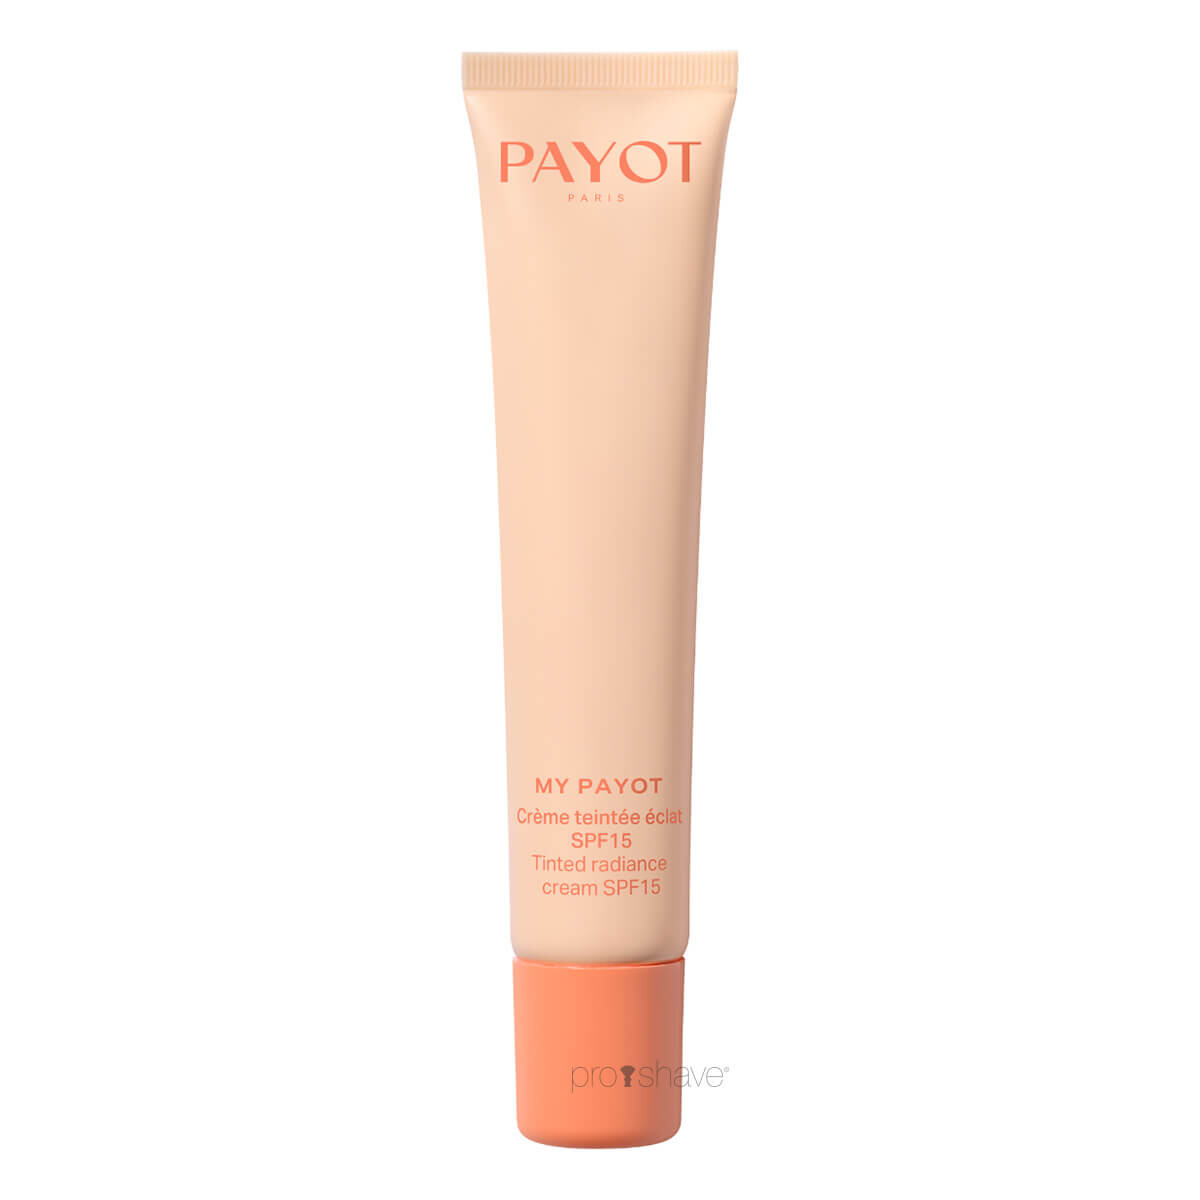 Billede af Payot My Payot Tinted Radiance Cream SPF 15, 40 ml.